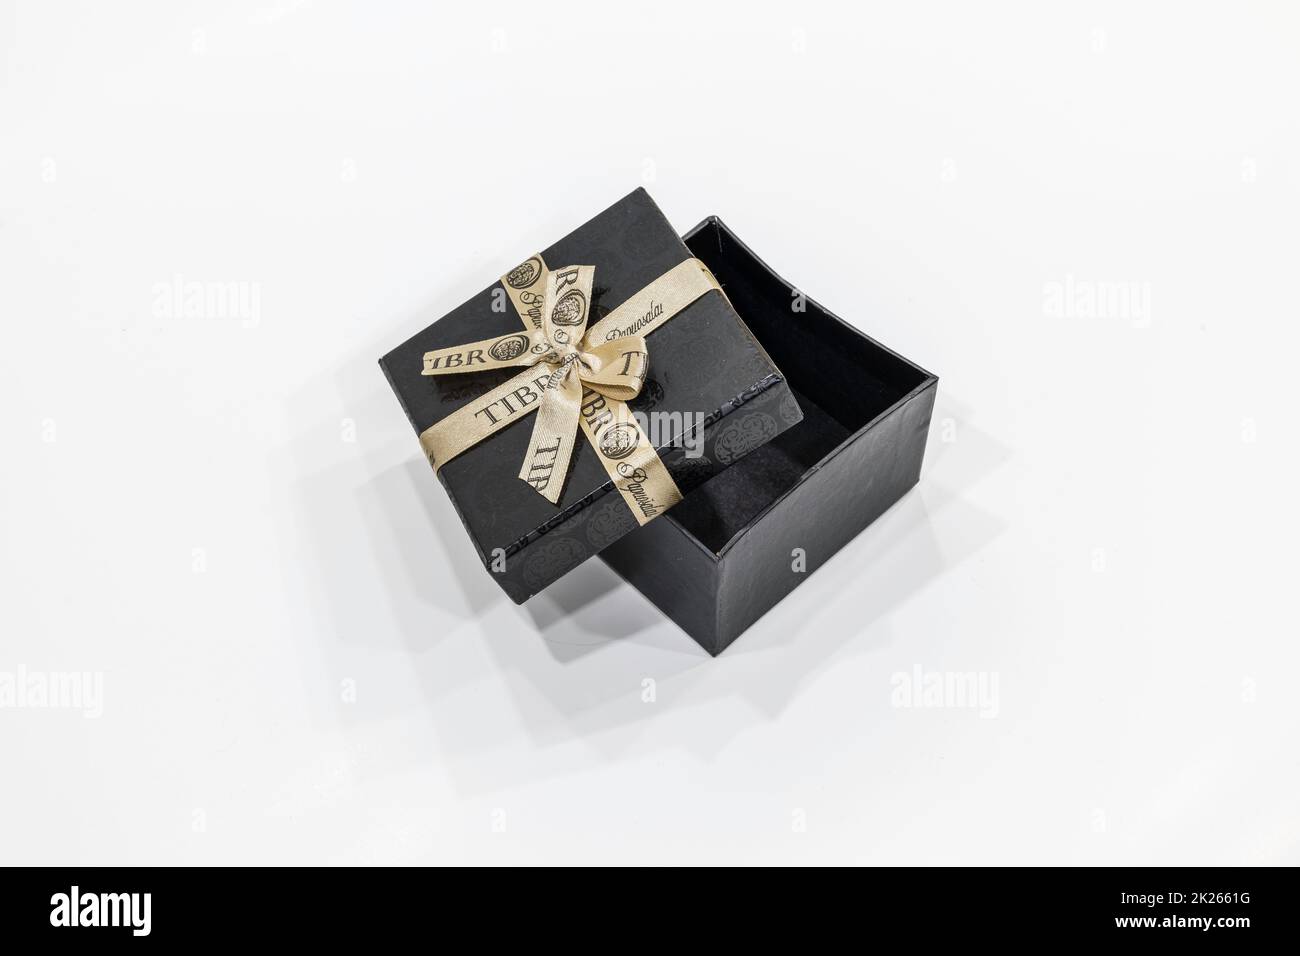 open black gift box with a ribbon isolated on a white background. For Valentine's Day, Women's Day, Christmas and New Year's Stock Photo